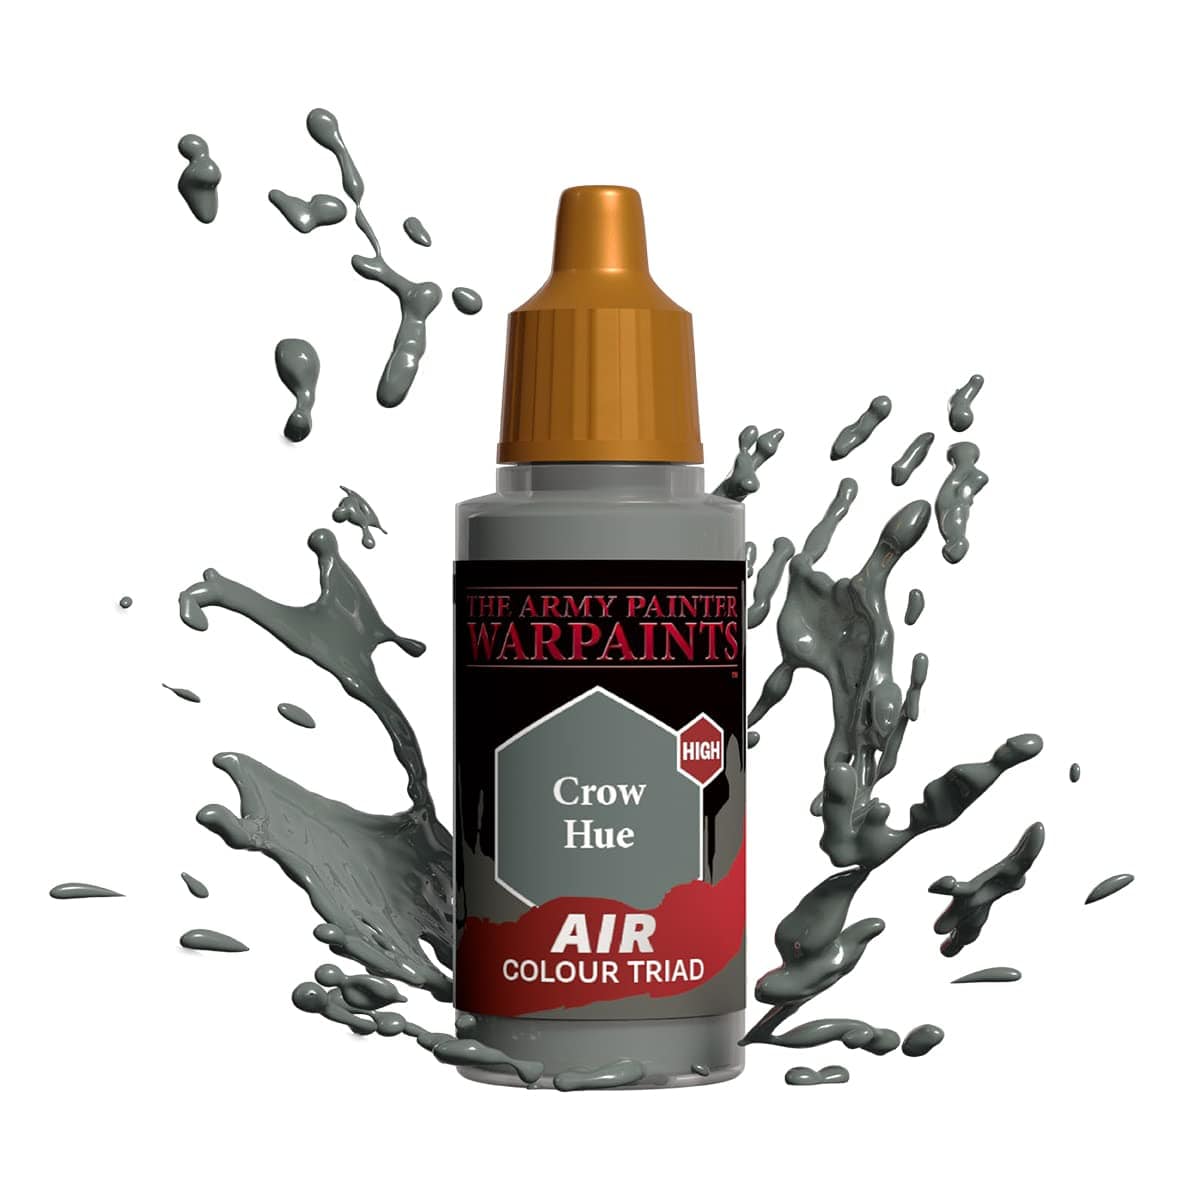 The Army Painter Accessories The Army Painter Warpaints Air: Crow Hue 18ml